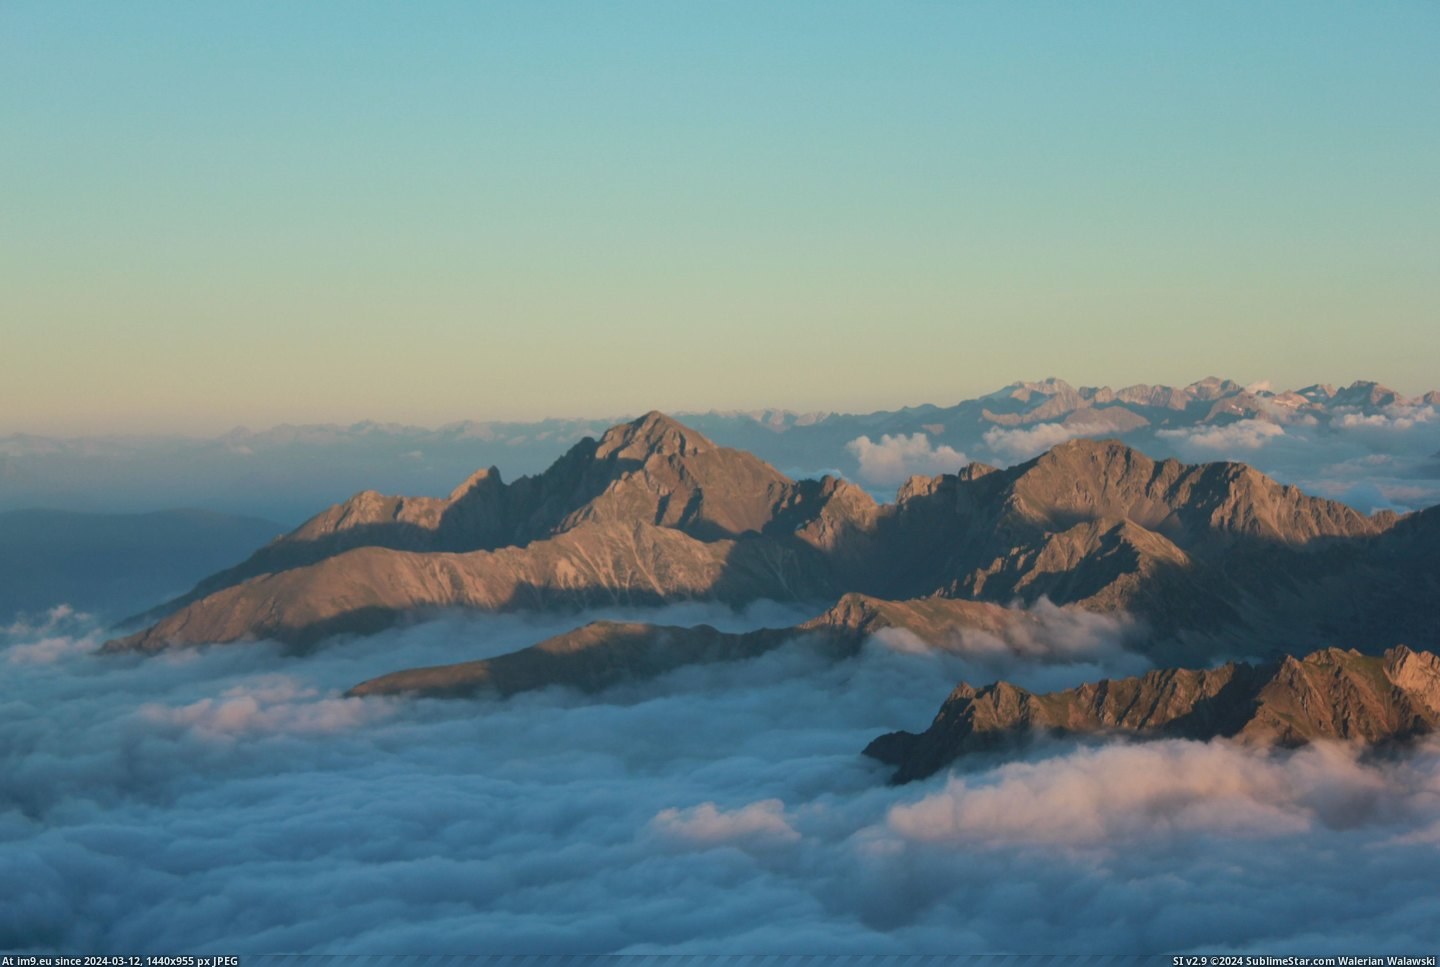 #Sea #Late #France #Central #Midi #Pyrenees #Bigorre #Afternoon #Clouds #East [Earthporn] Late afternoon above the sea of clouds: looking east over the central Pyrenees, Pic du Midi de Bigorre, France [3456 Pic. (Bild von album My r/EARTHPORN favs))